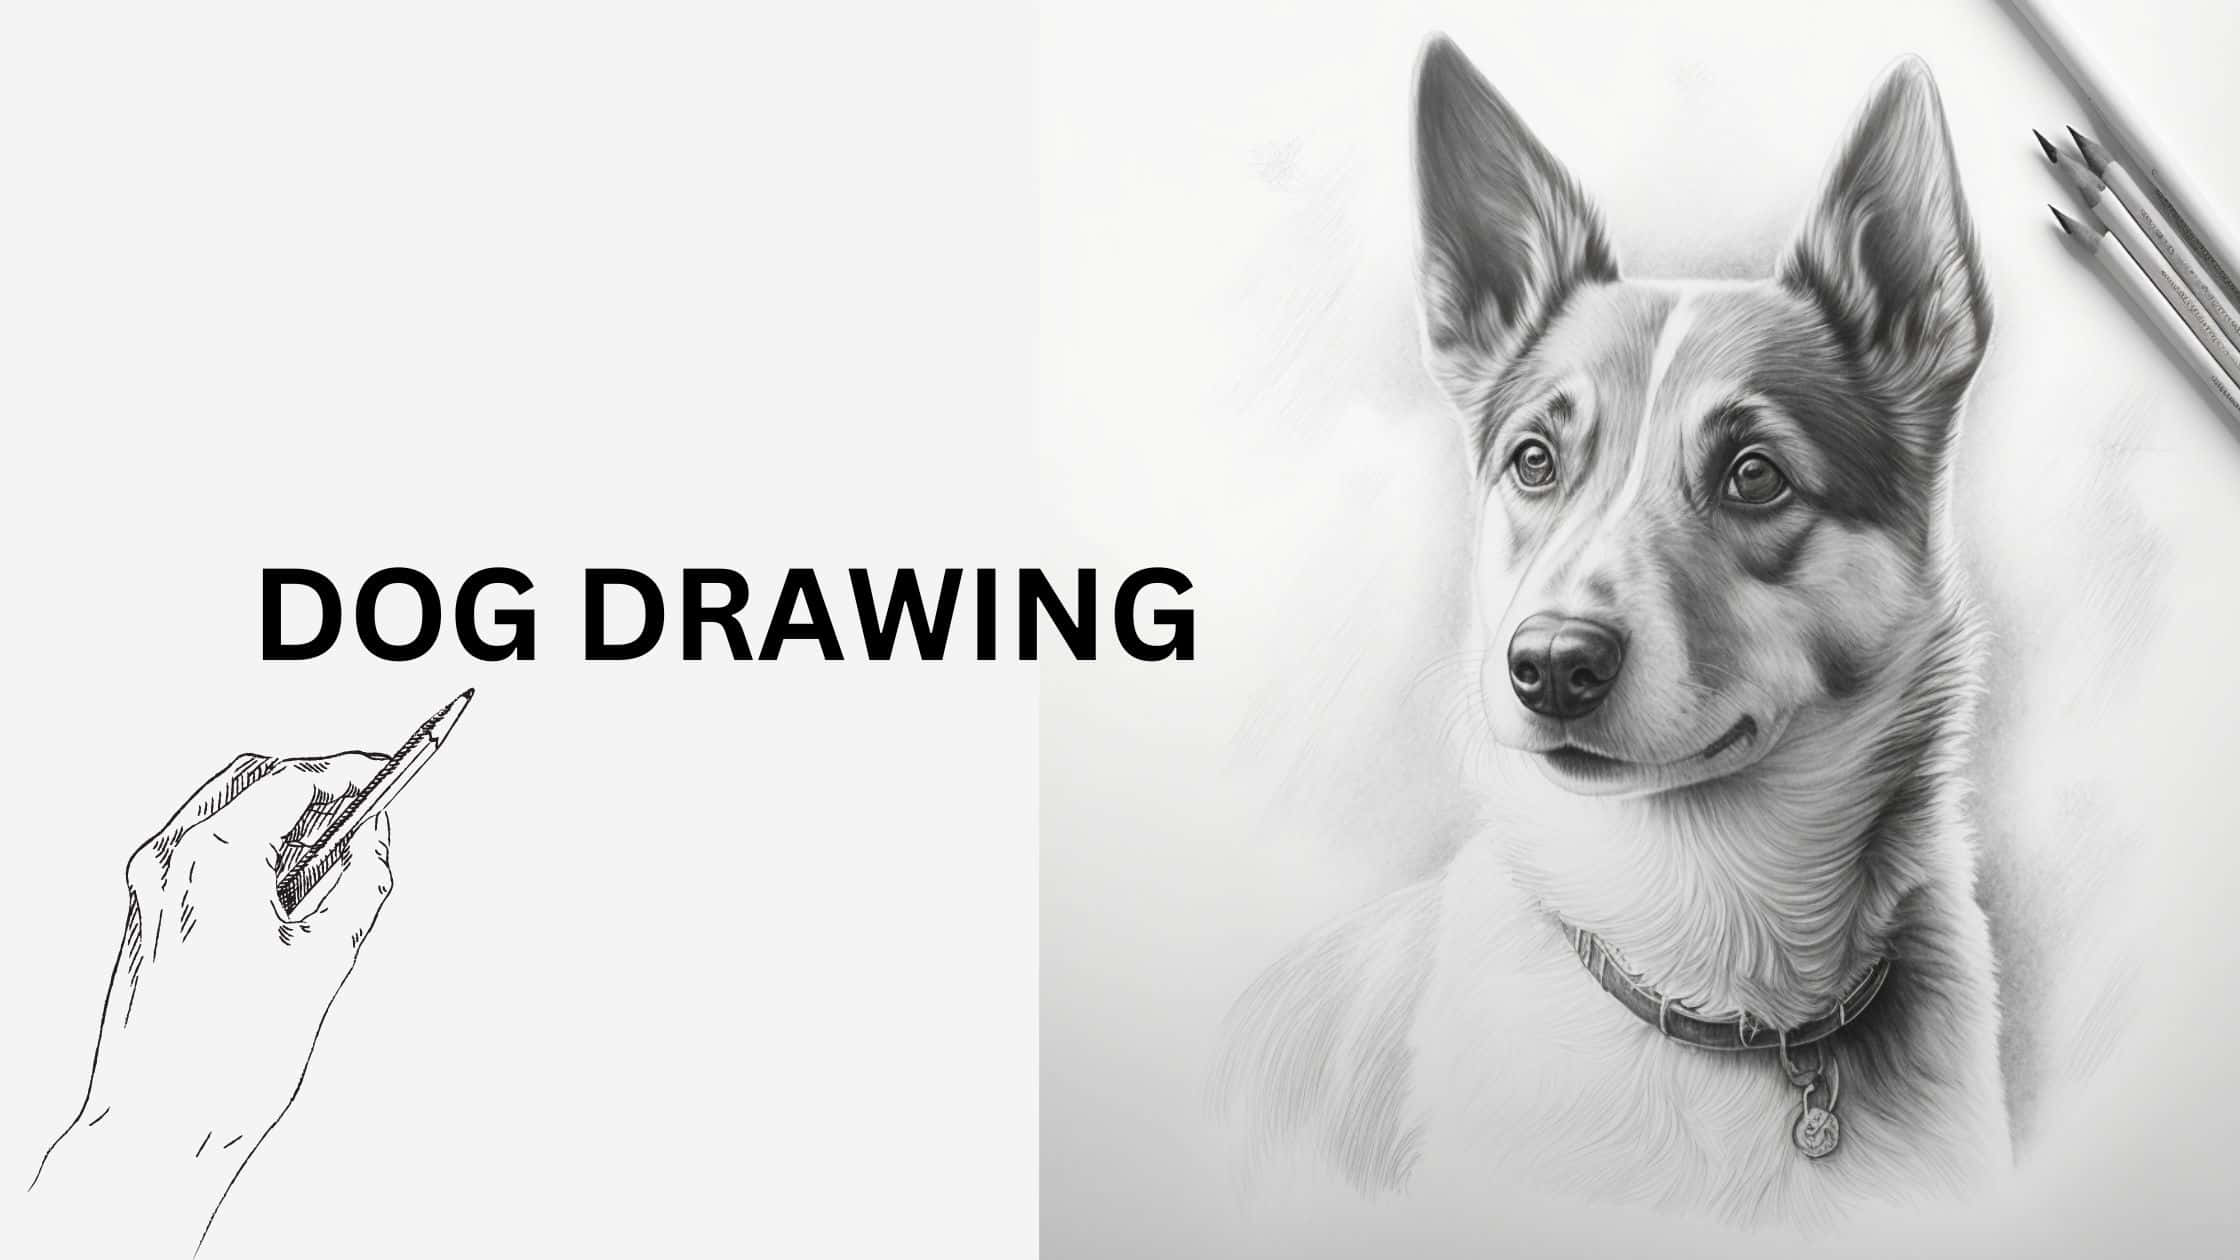 A Dog Drawing With A Pencil And A Brush